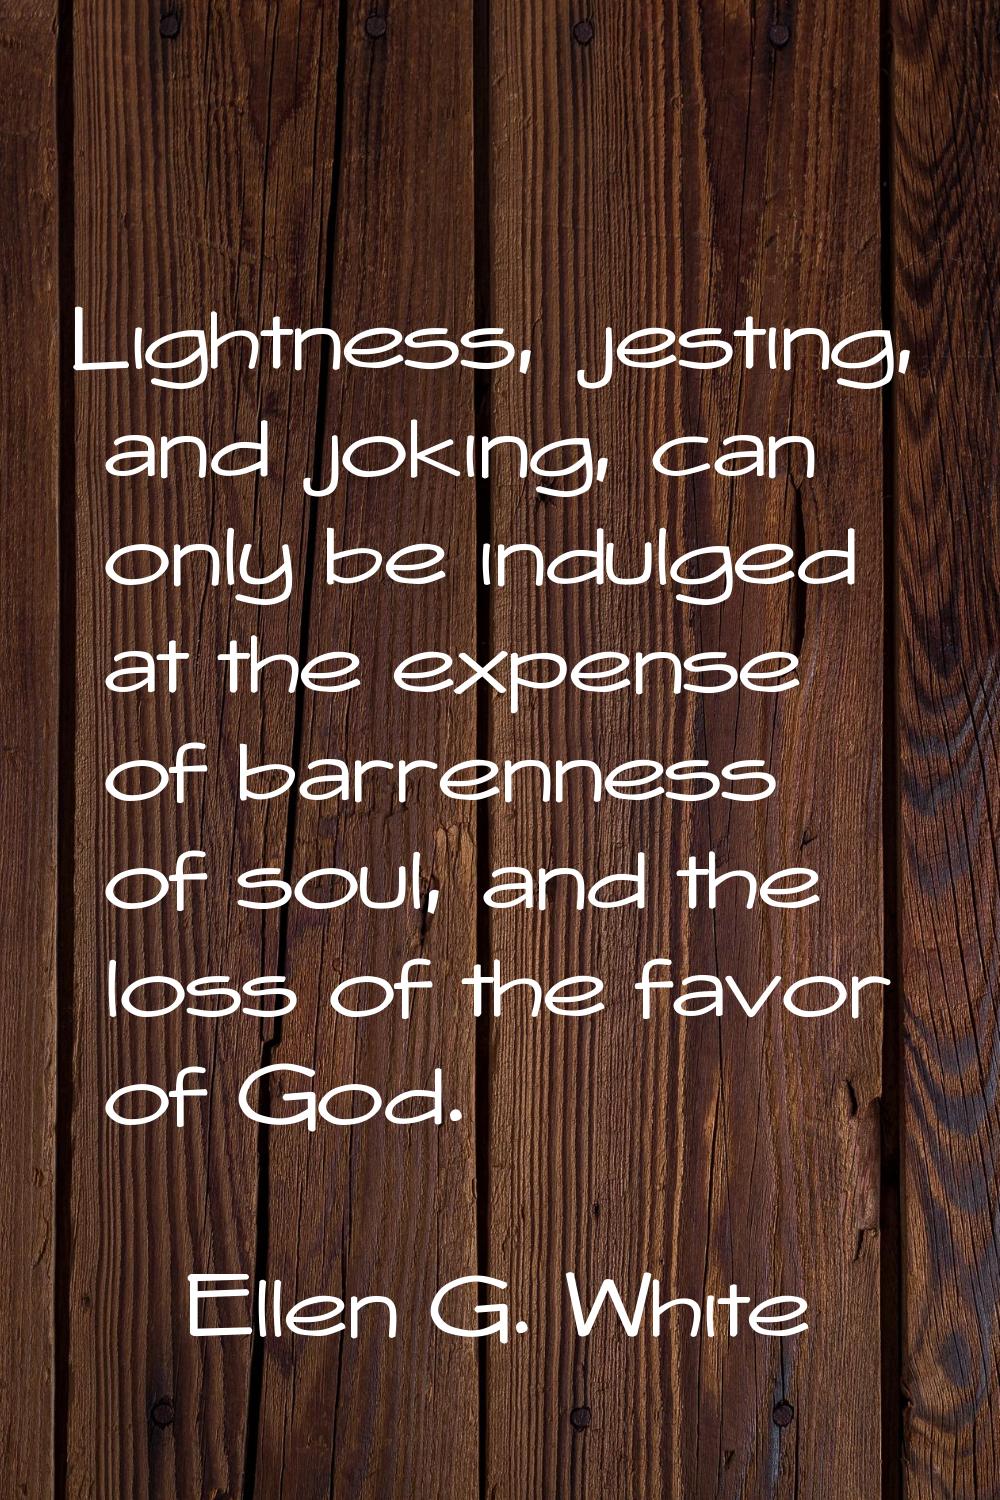 Lightness, jesting, and joking, can only be indulged at the expense of barrenness of soul, and the 